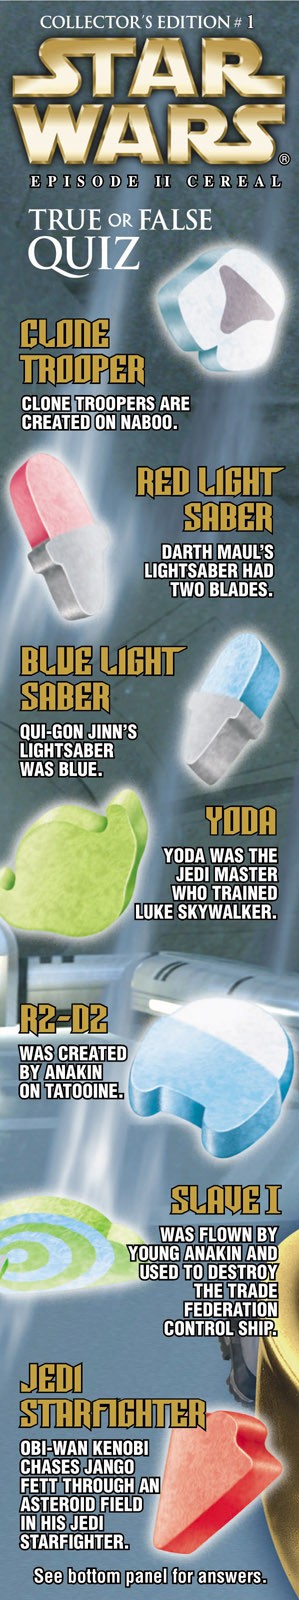 Side of the Attack of the Clones cereal box